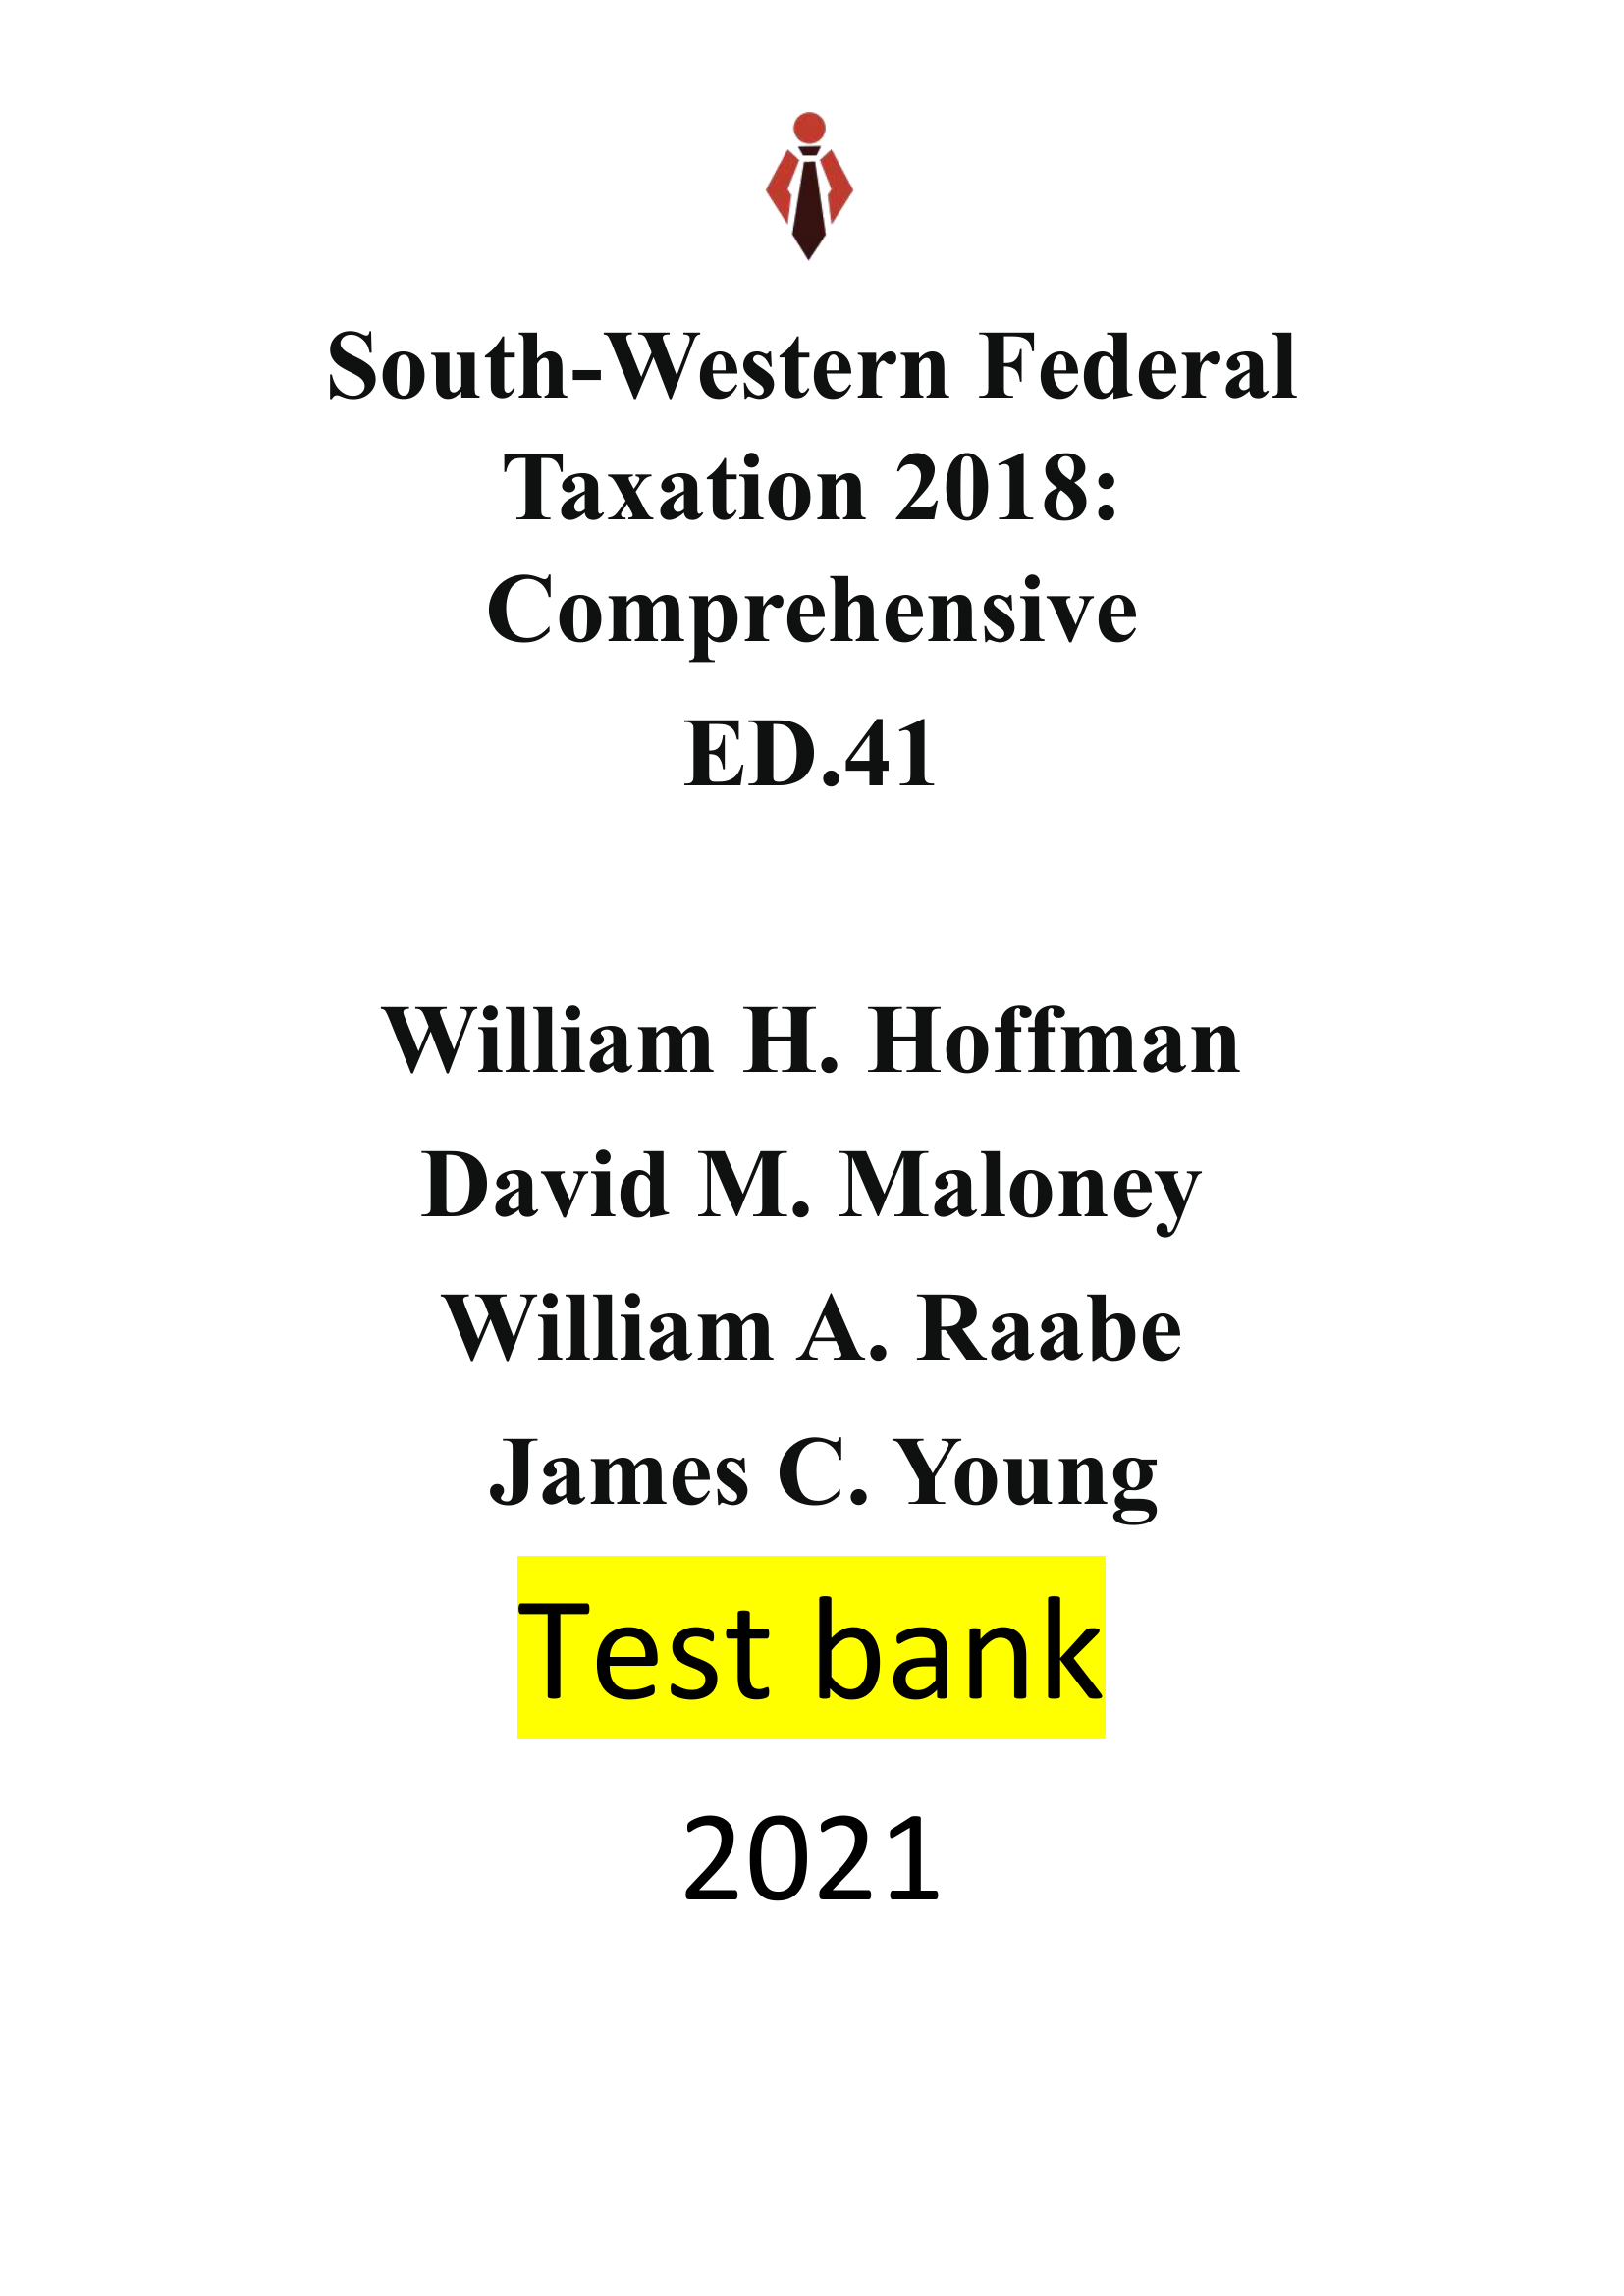 South-Western Federal Taxation 2018 Comprehensive ED.41 by William H. Hoffman, David M. Maloney, William A. Raabe, James C. Young | Test Bank| Reviewed/Updated for 2021. All Chapters included 1-28(2731 pages)